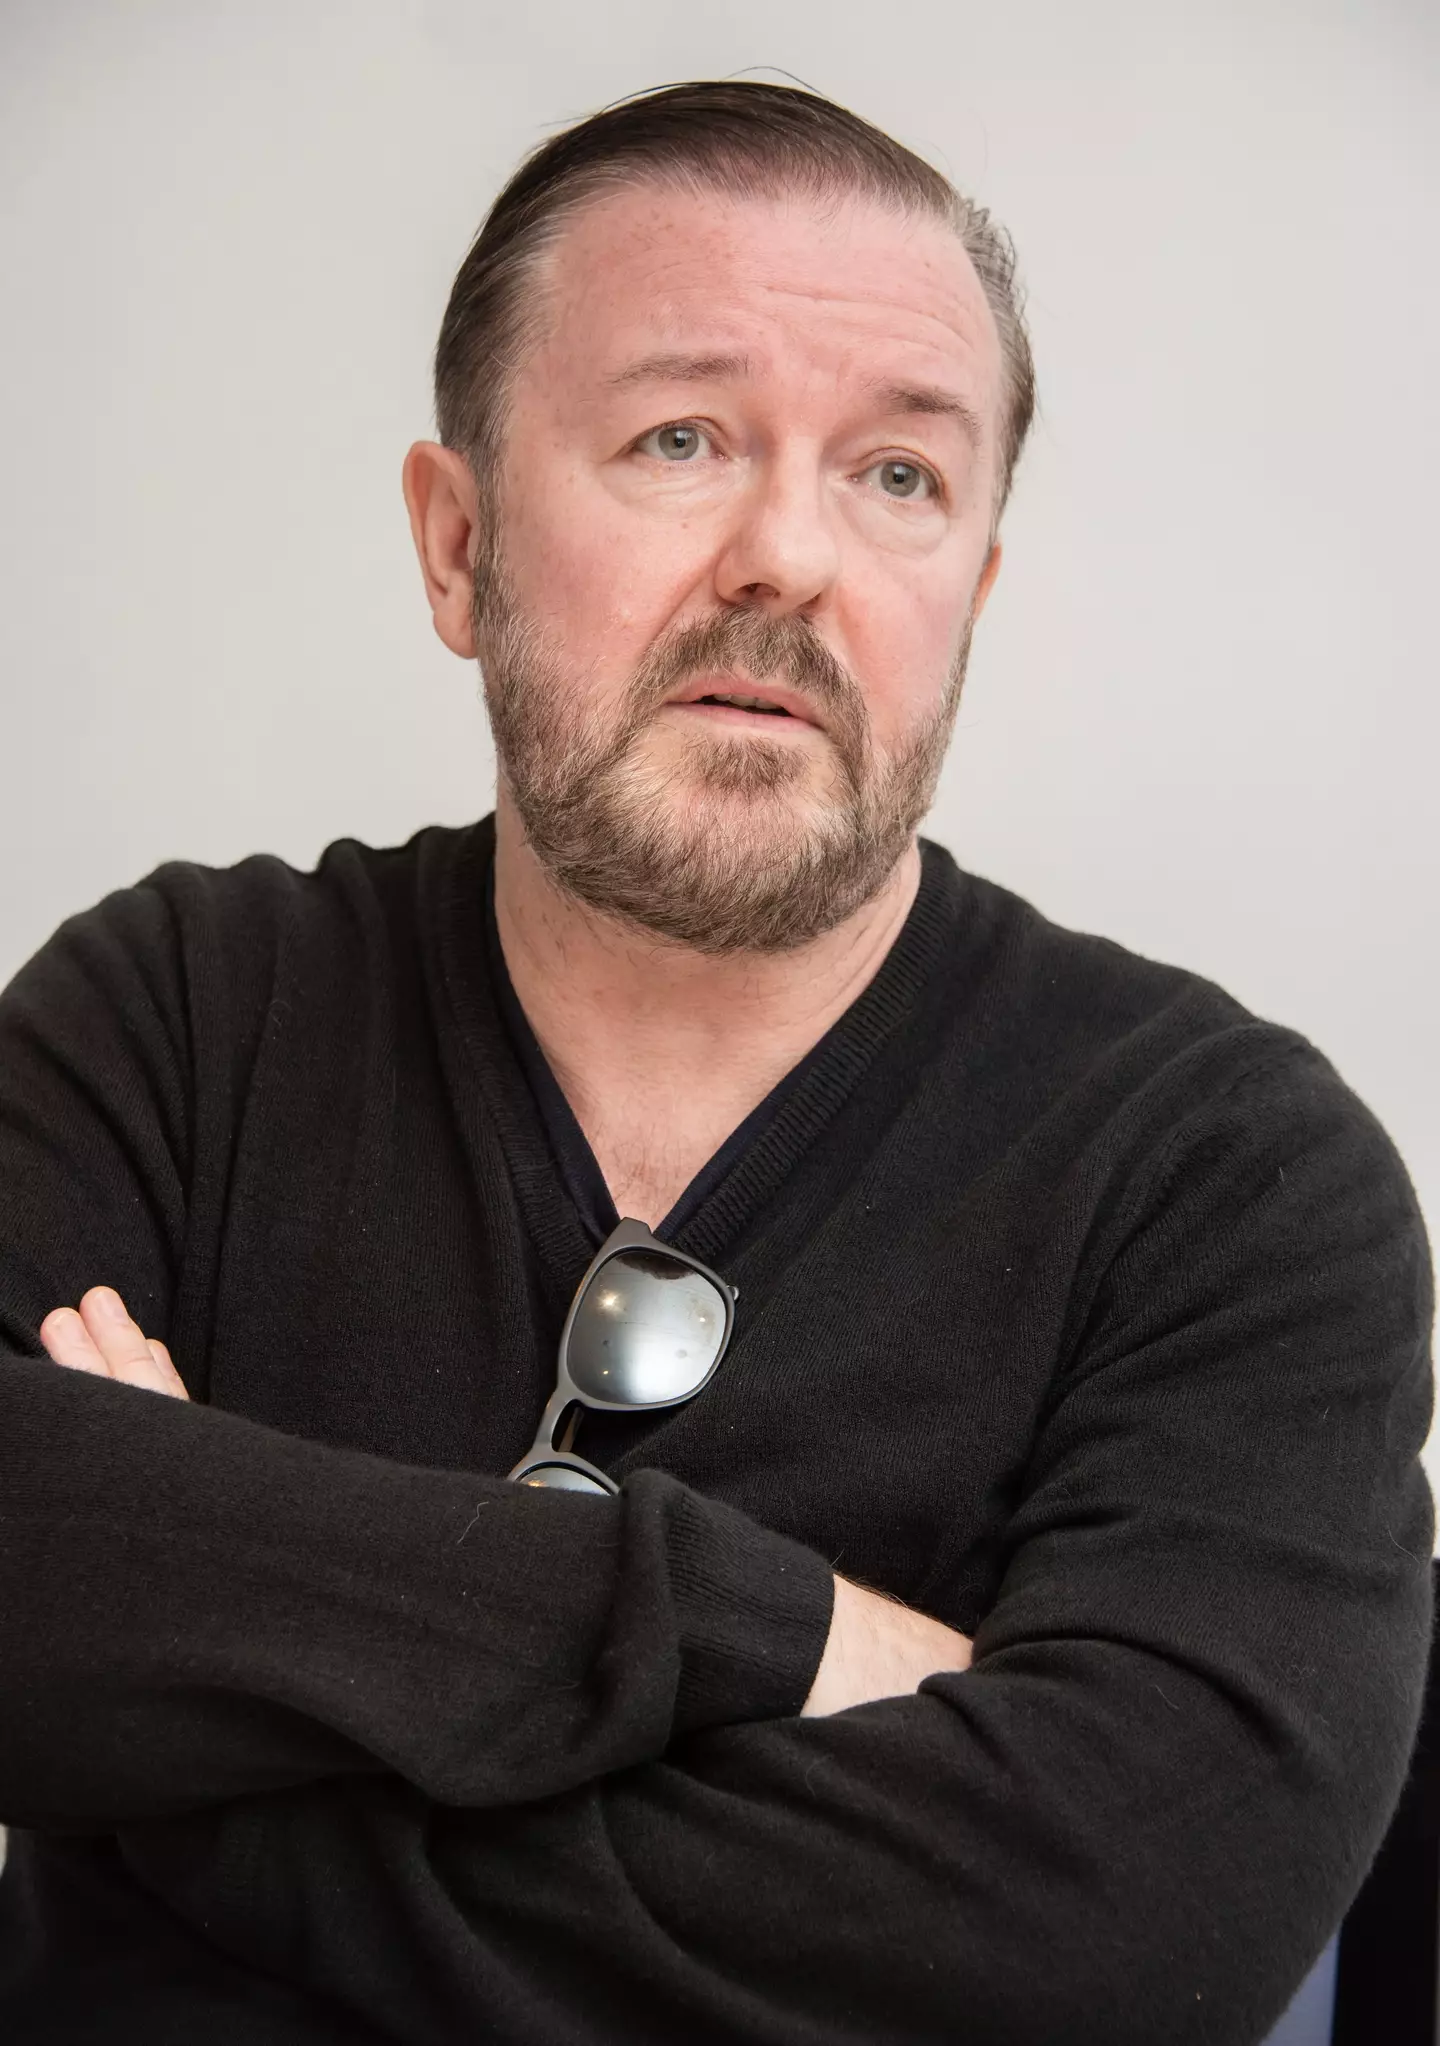 Thousands of people have signed a petition demanding Netflix remove Ricky Gervais' upcoming skit.